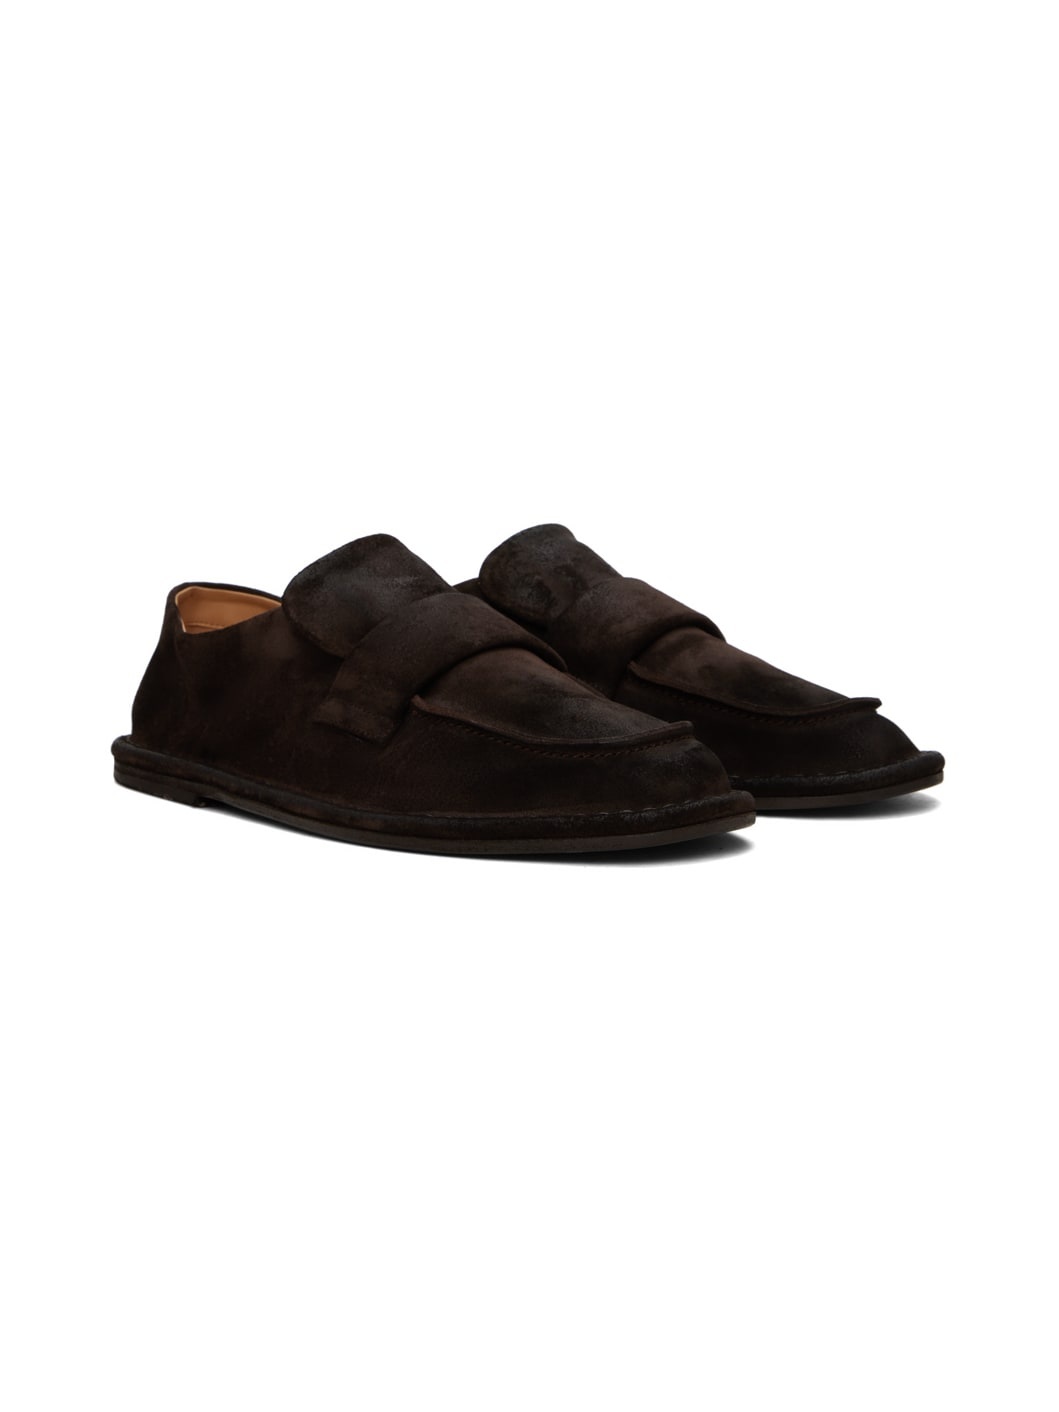 Brown Filo Loafers - 4